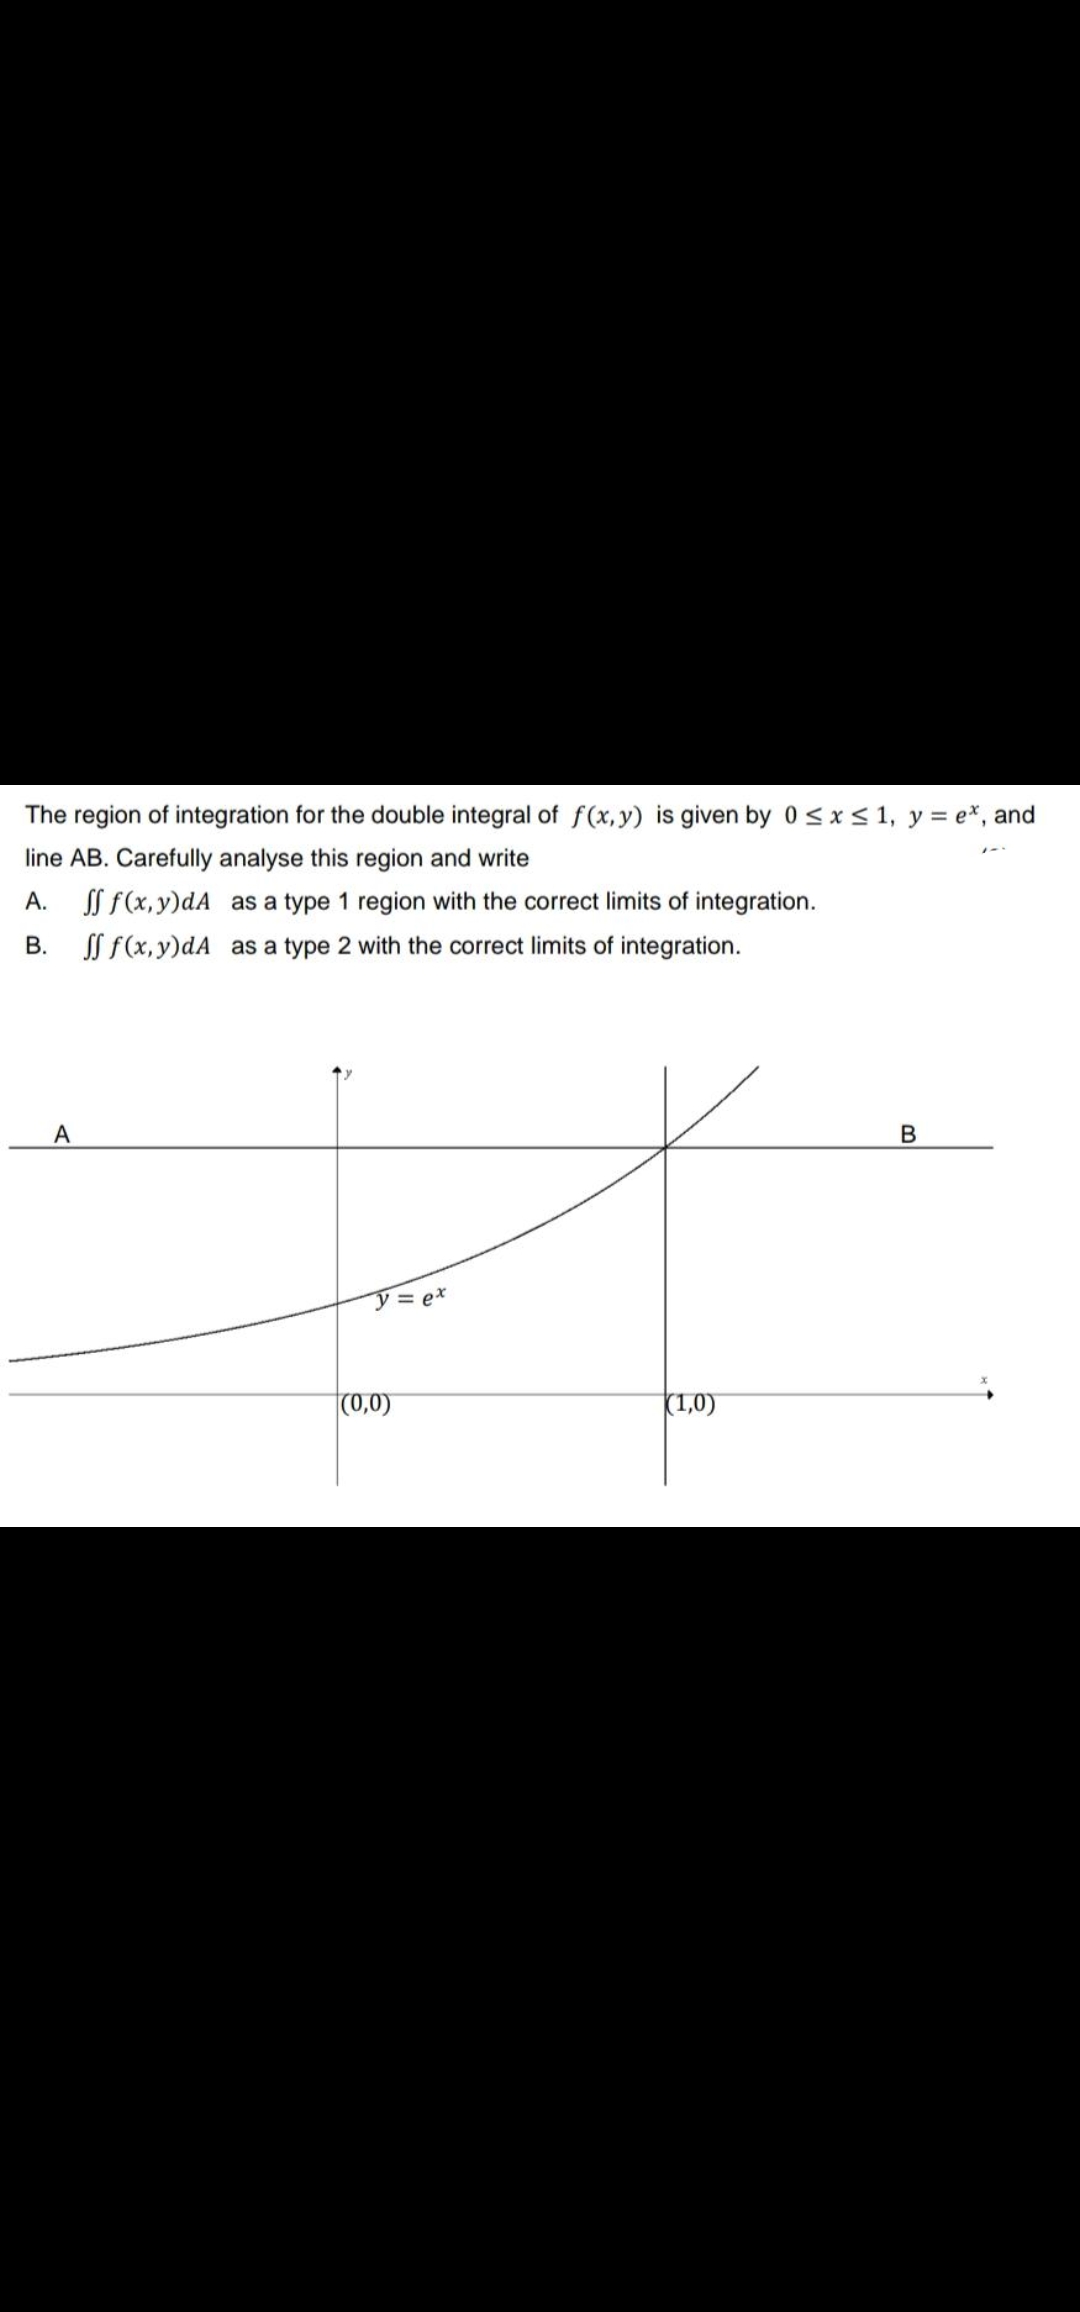 The region of integration for the double integral of f(x, y) is given by 0<x< 1, y = e*, and
line AB. Carefully analyse this region and write
A.
SS f(x,y)dA as a type 1 region with the correct limits of integration.
В.
SS f(x, y)dA as a type 2 with the correct limits of integration.
A
ア=ex
(0,0)
(1,0)
